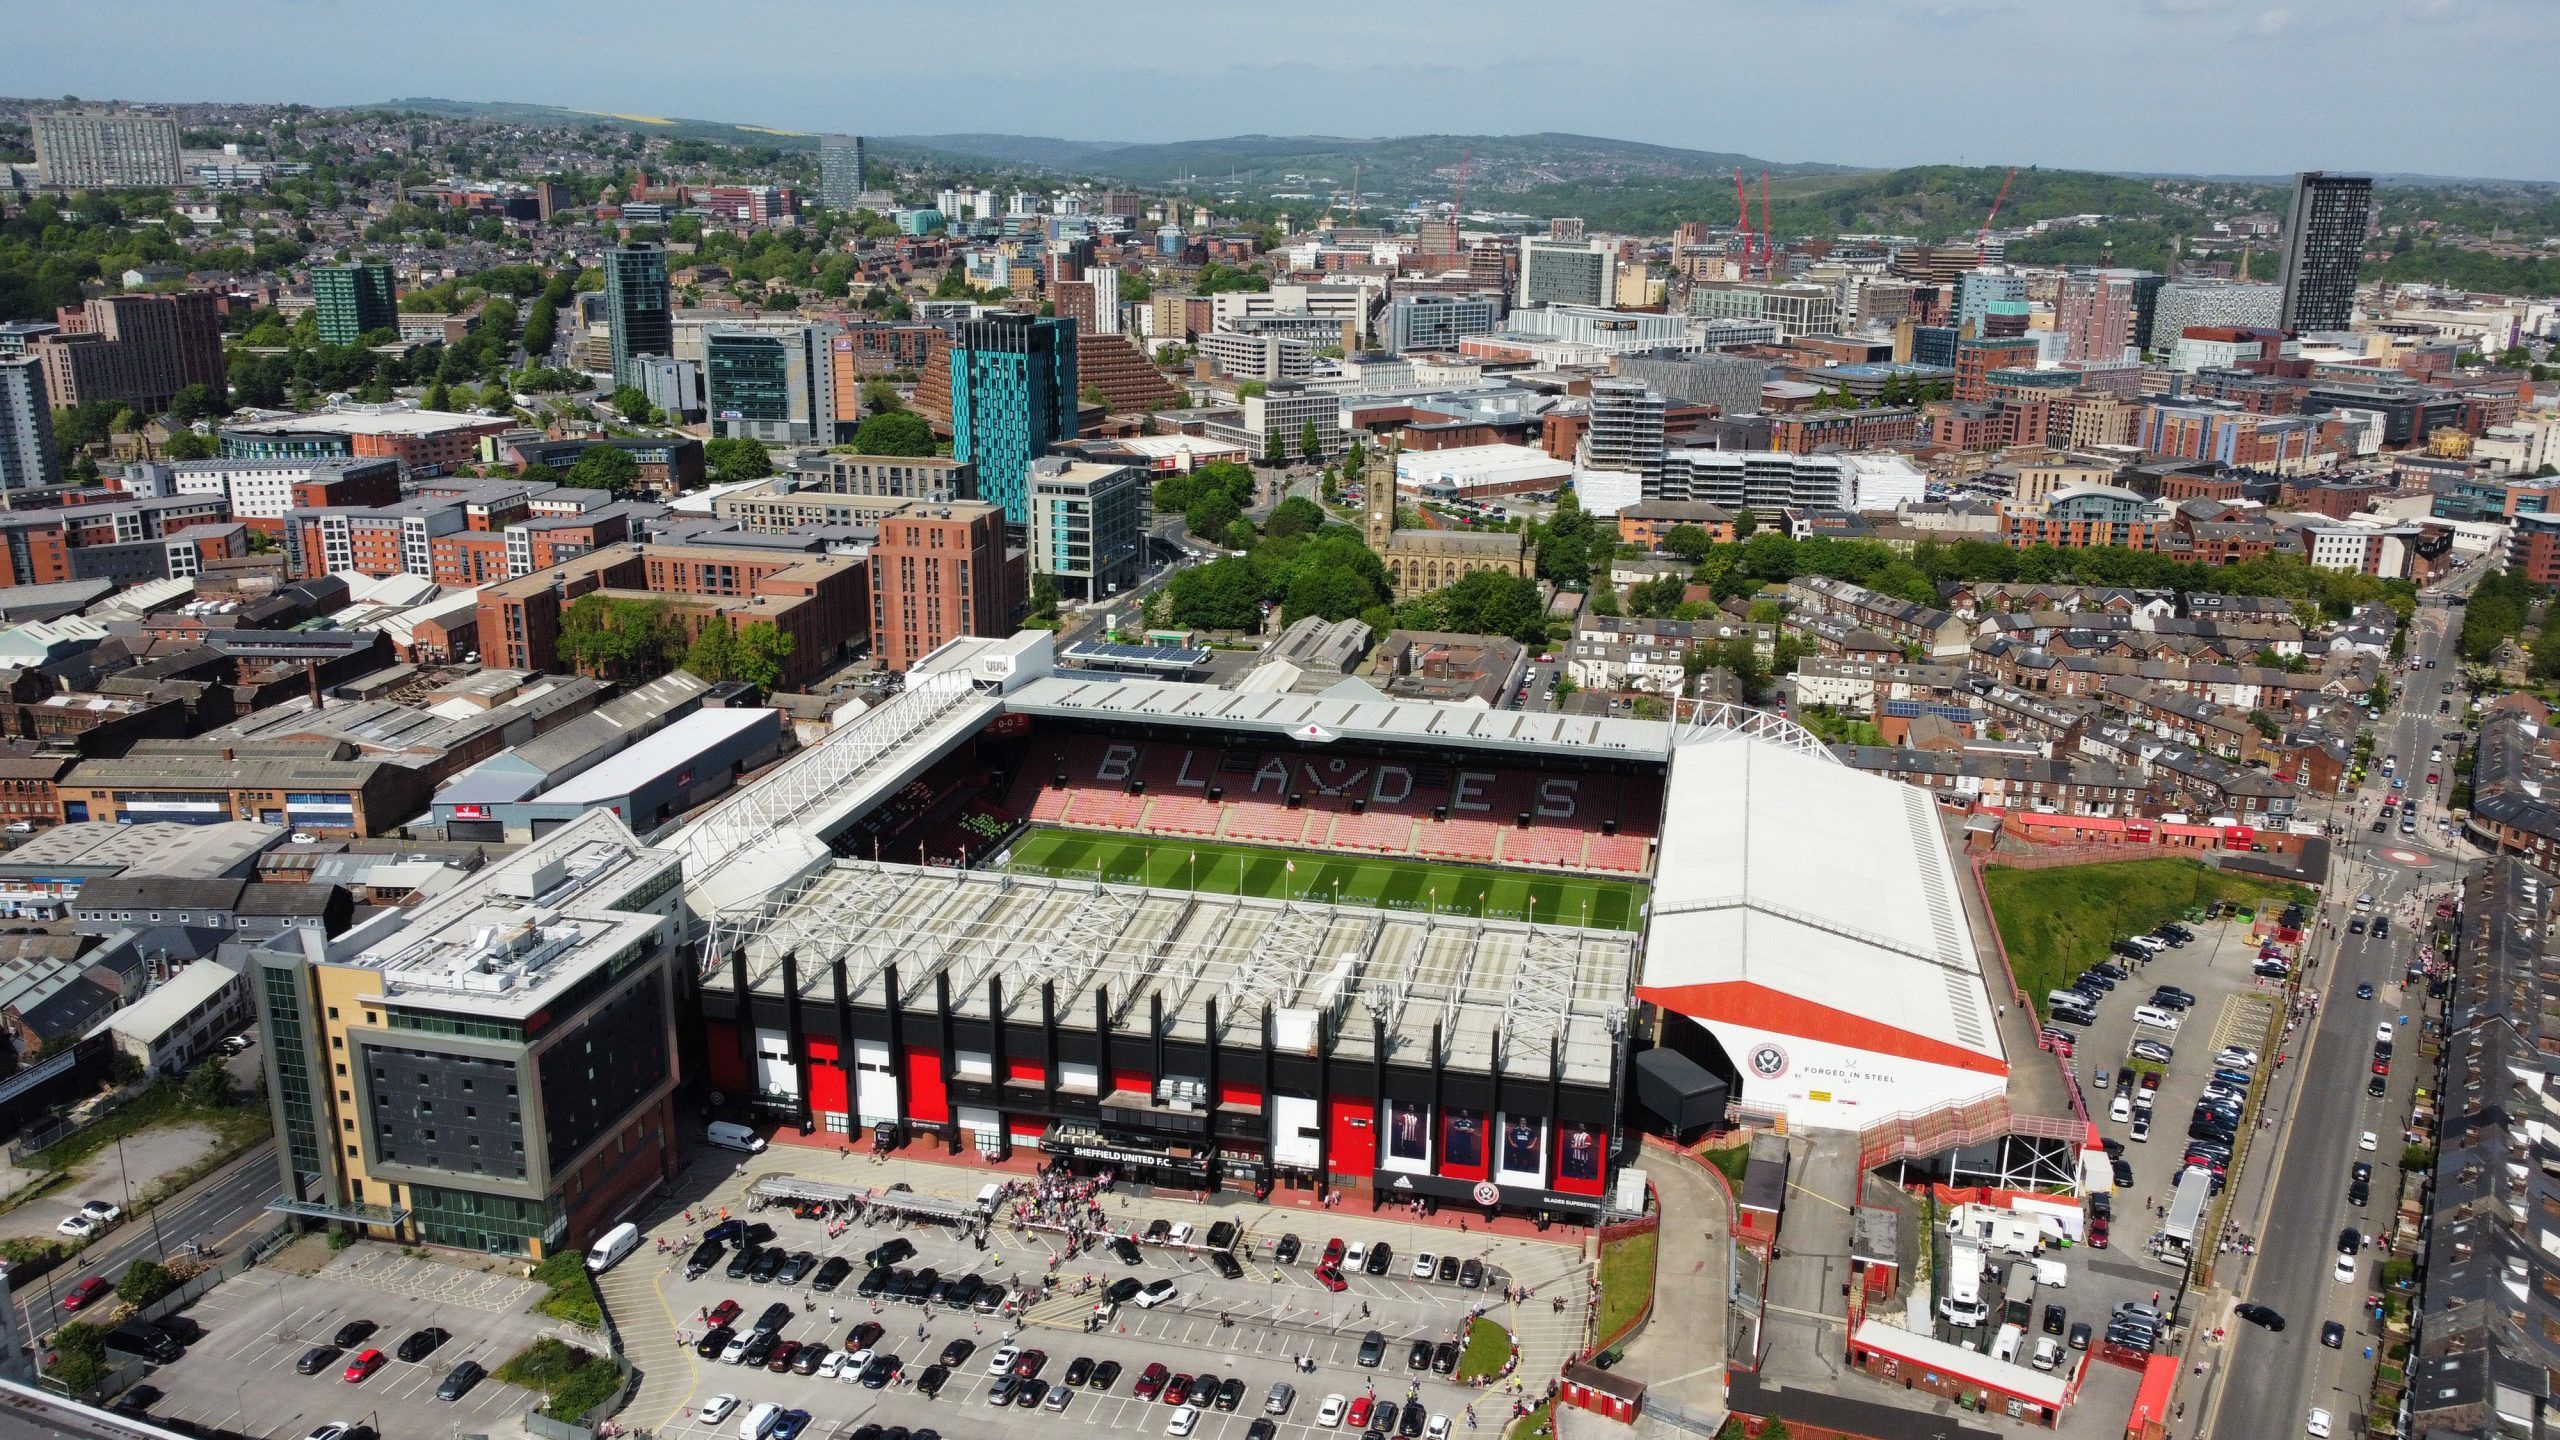 Soccer Football - Championship - Semi Final - First Leg - Sheffield United v Nottingham Forest - Bramall Lane, Sheffield, Britain - May 14, 2022 General view outside the stadium before the match. Picture taken with a drone. Action Images via Reuters/Carl Recine EDITORIAL USE ONLY. No use with unauthorized audio, video, data, fixture lists, club/league logos or 'live' services. Online in-match use limited to 75 images, no video emulation. No use in betting, games or single club /league/player pub